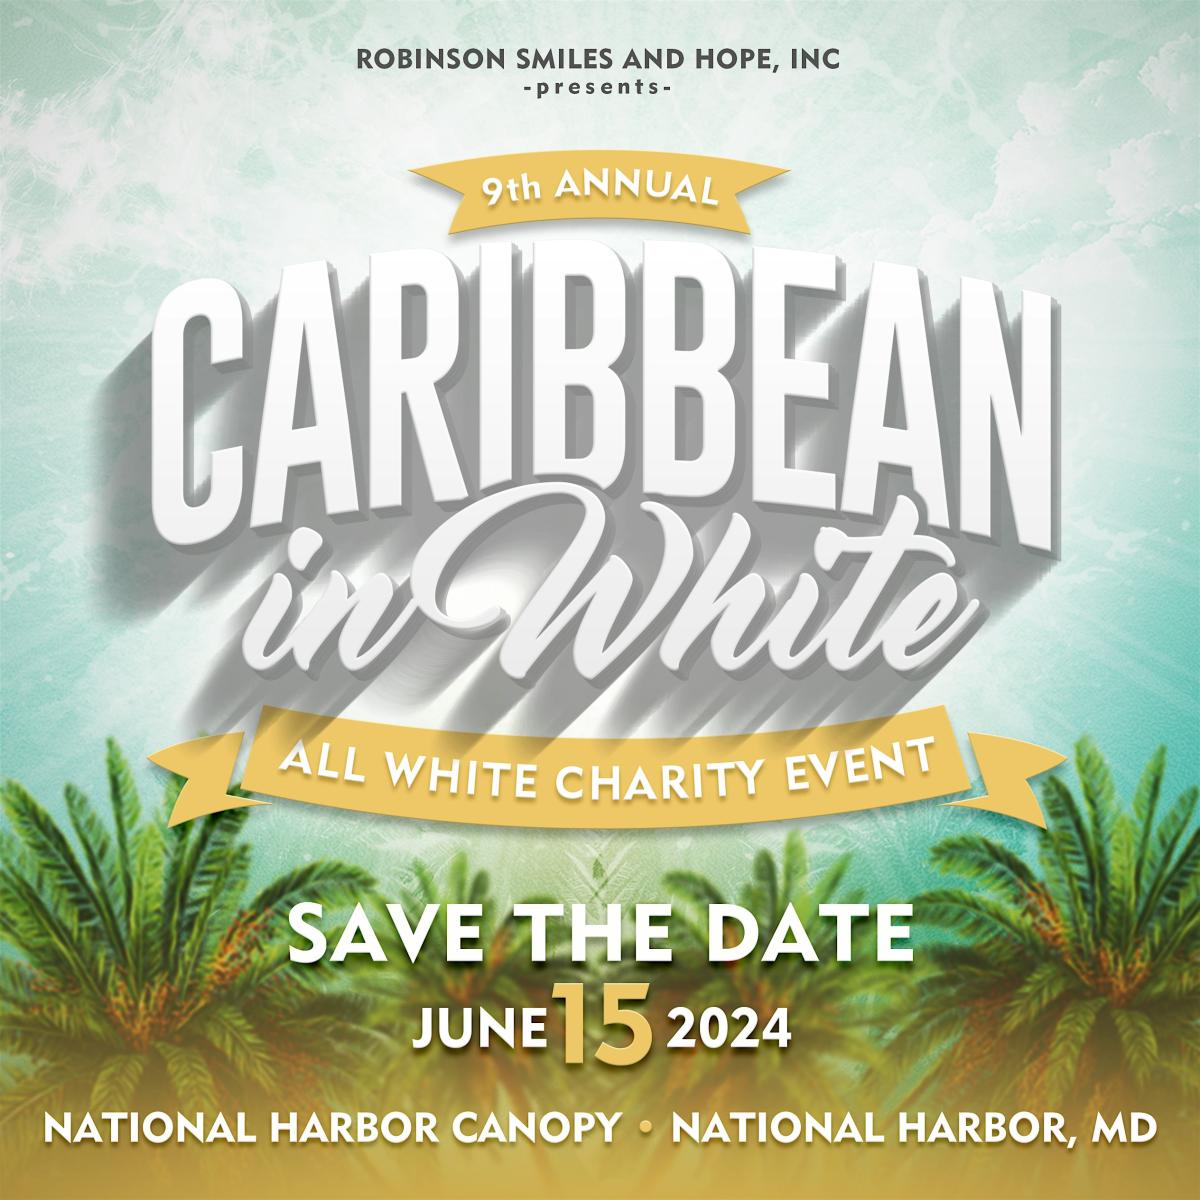 All White Caribbean Event flyer or graphic.